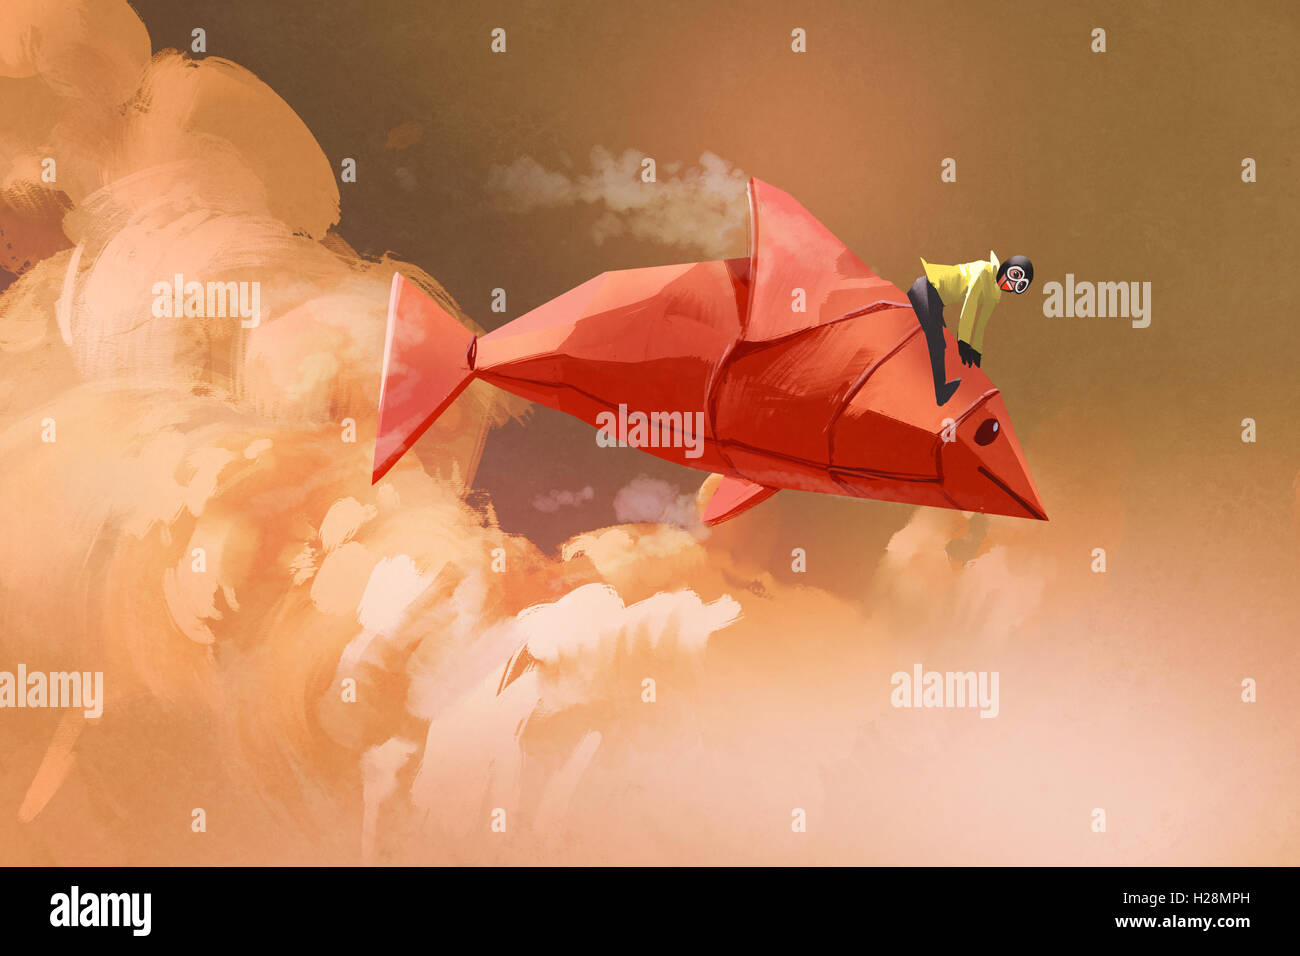 girl riding on the origami paper red fish in the clouds,illustration painting Stock Photo